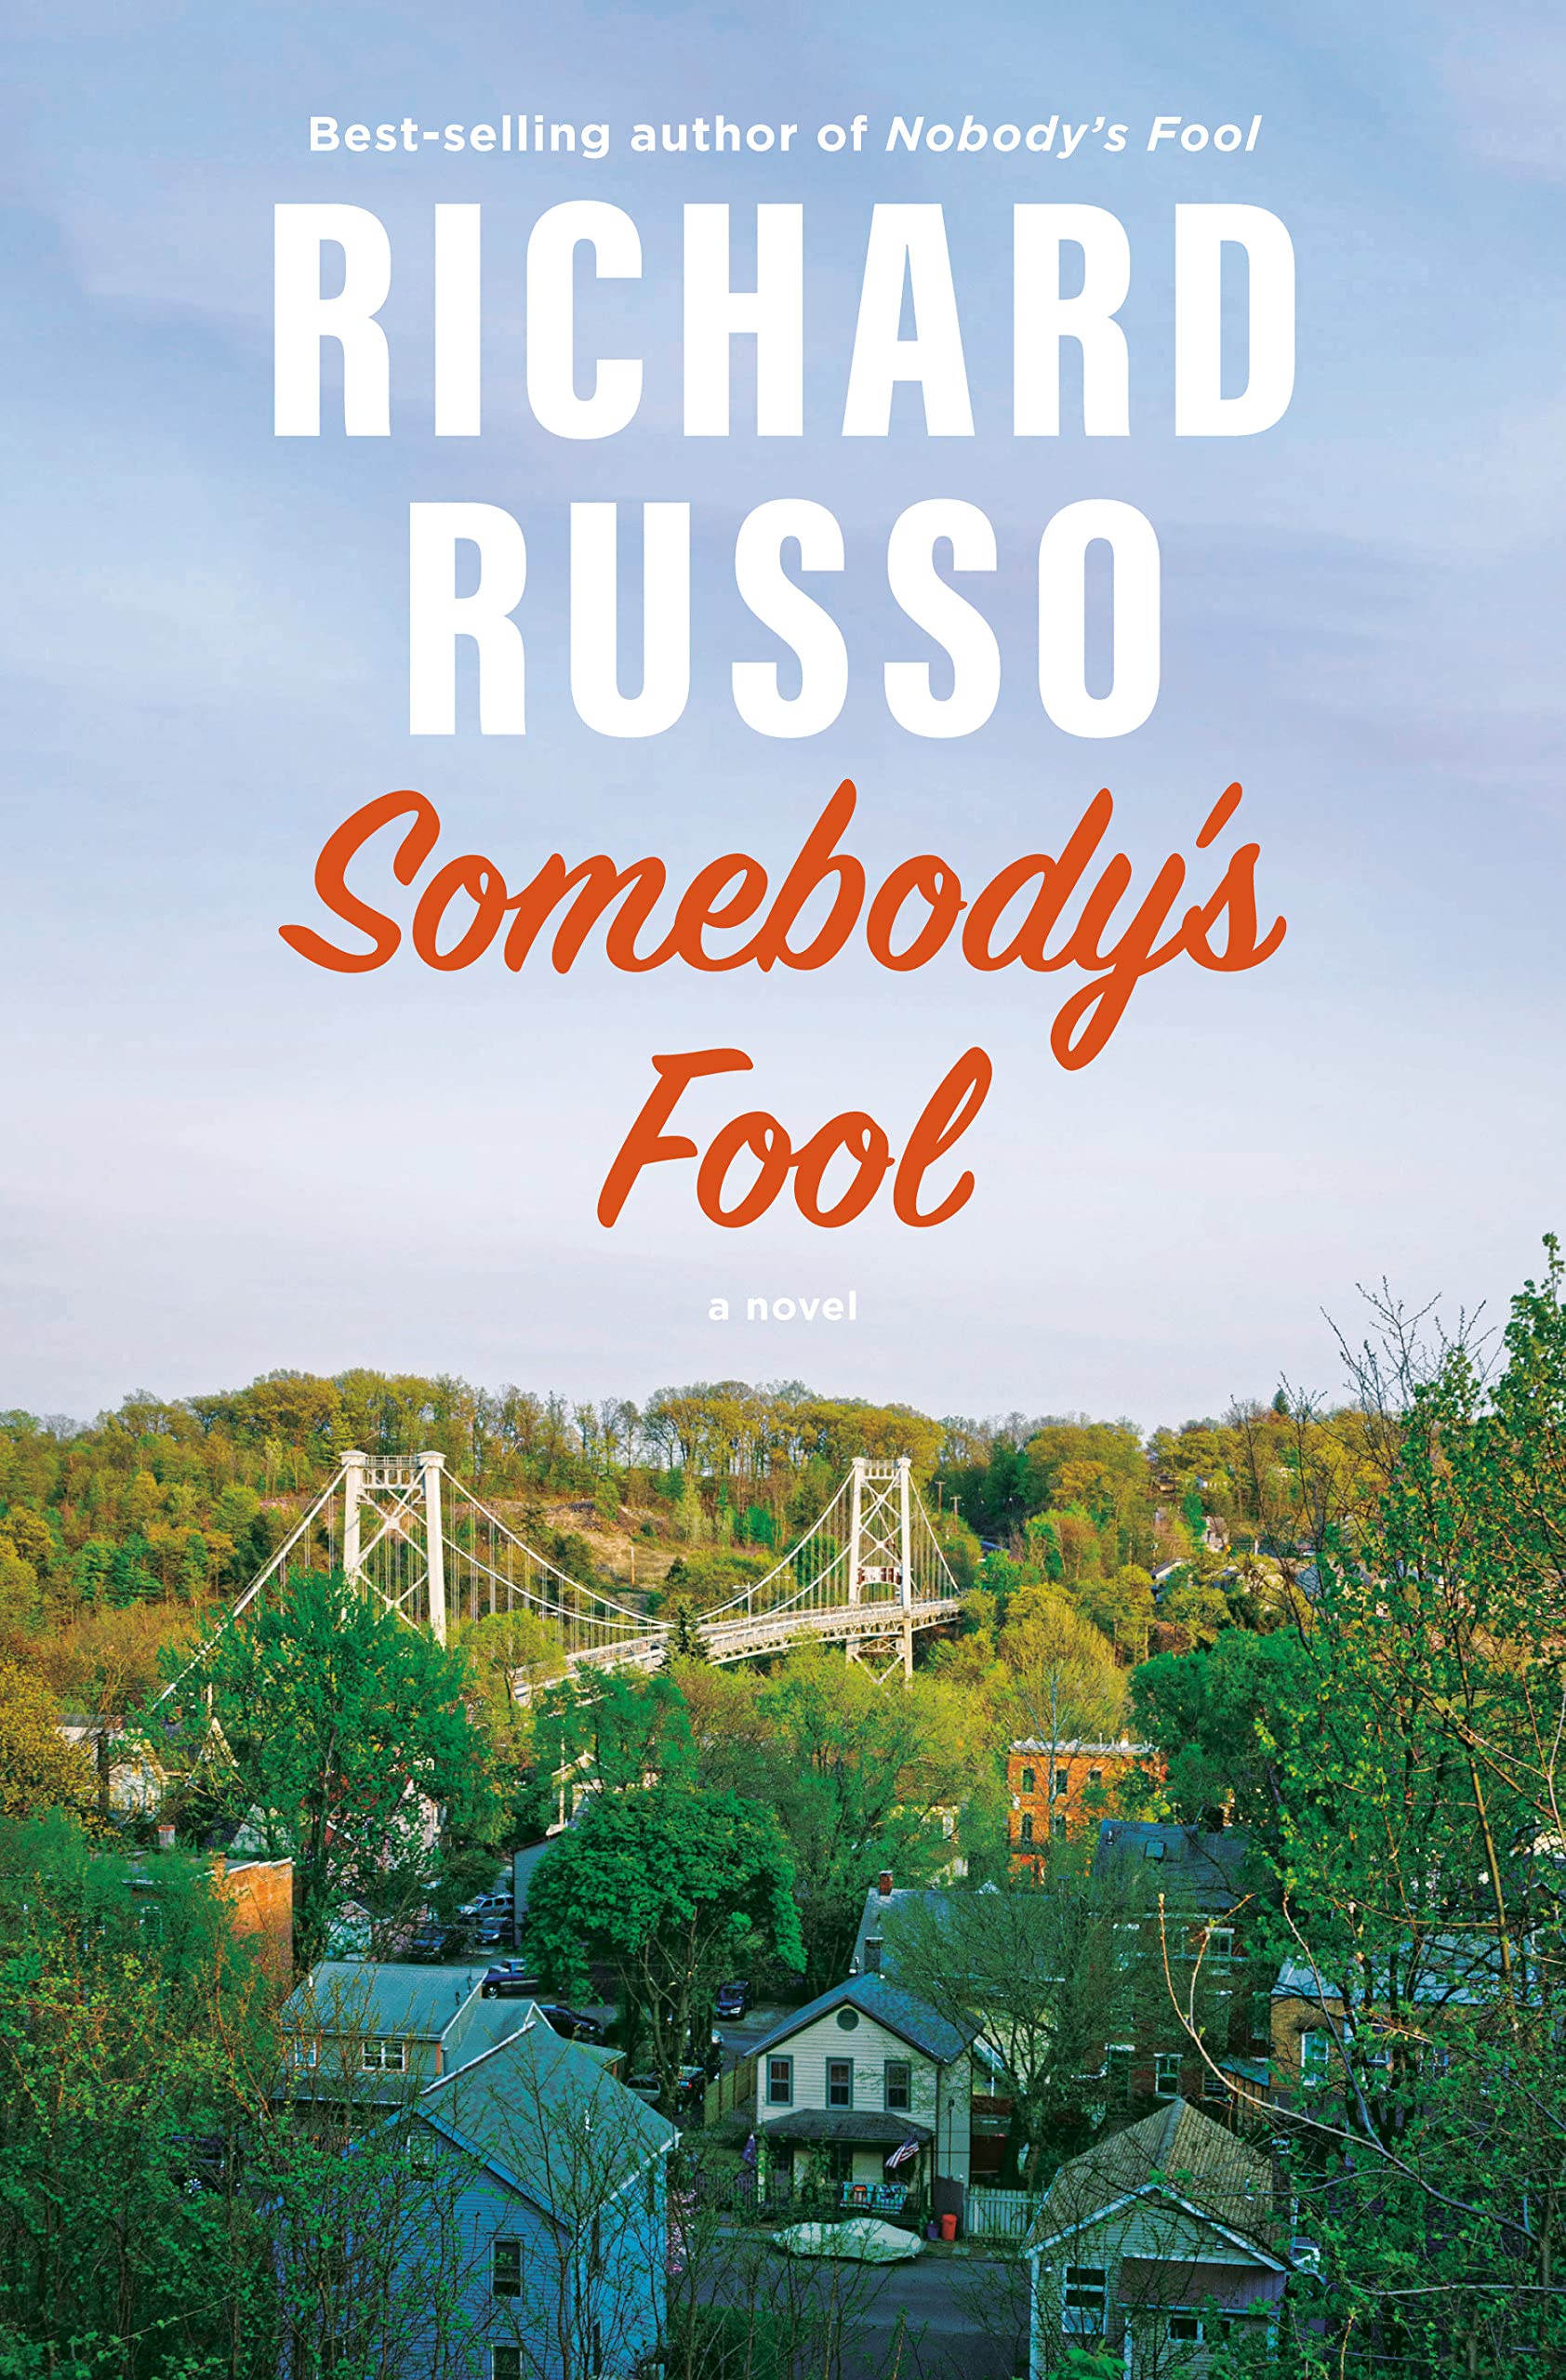 Image for "Somebody's Fool"